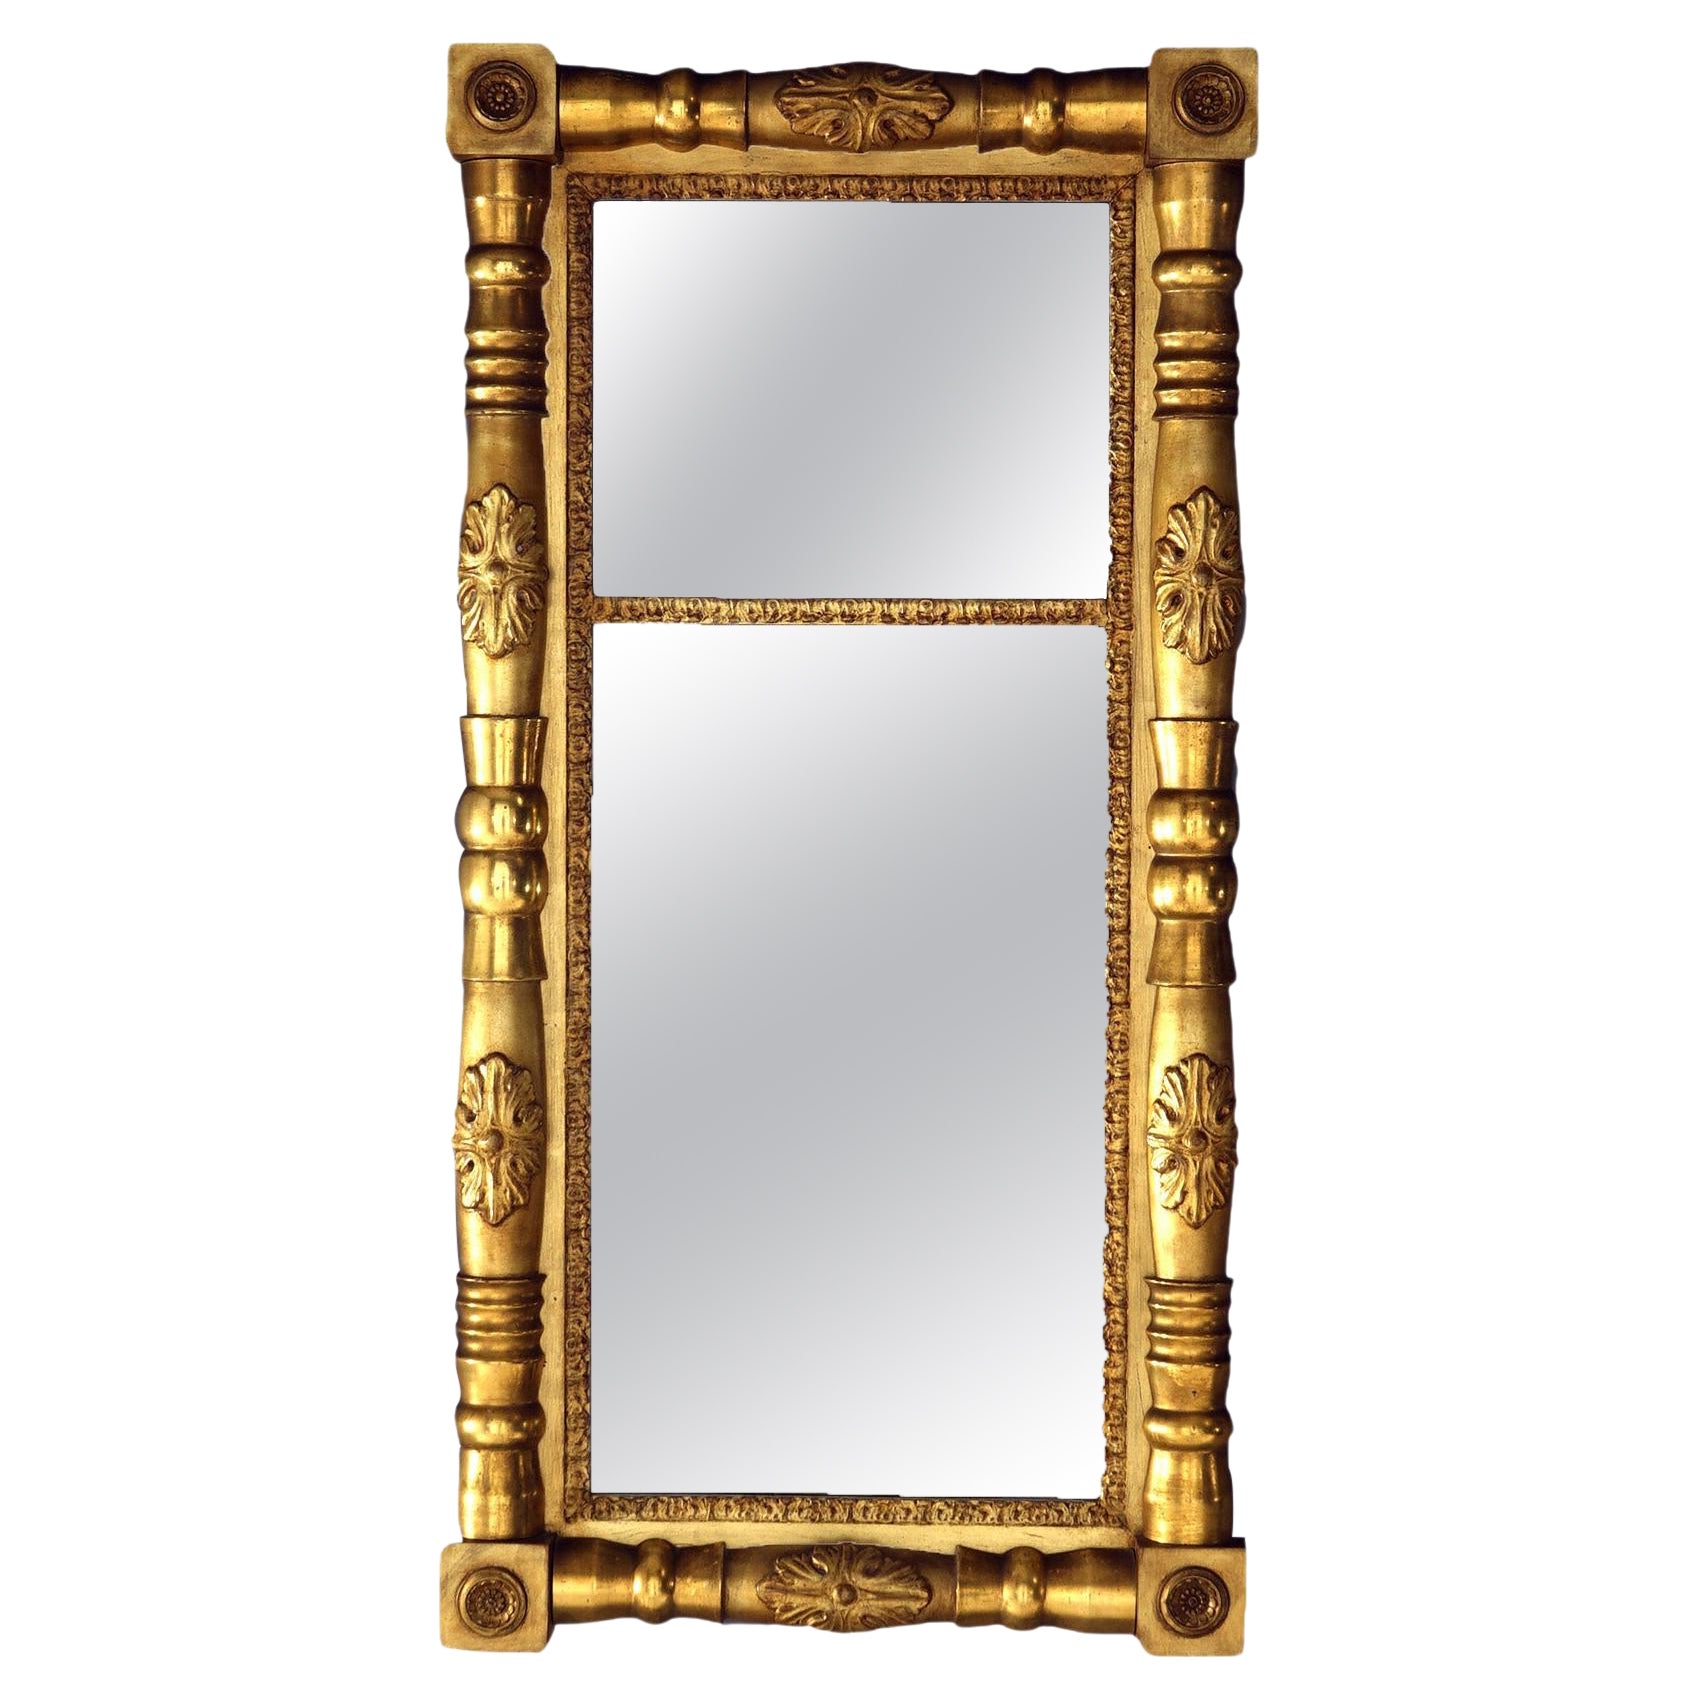 Antique Classical American Empire First Finish Giltwood Wall Mirror C1840 For Sale